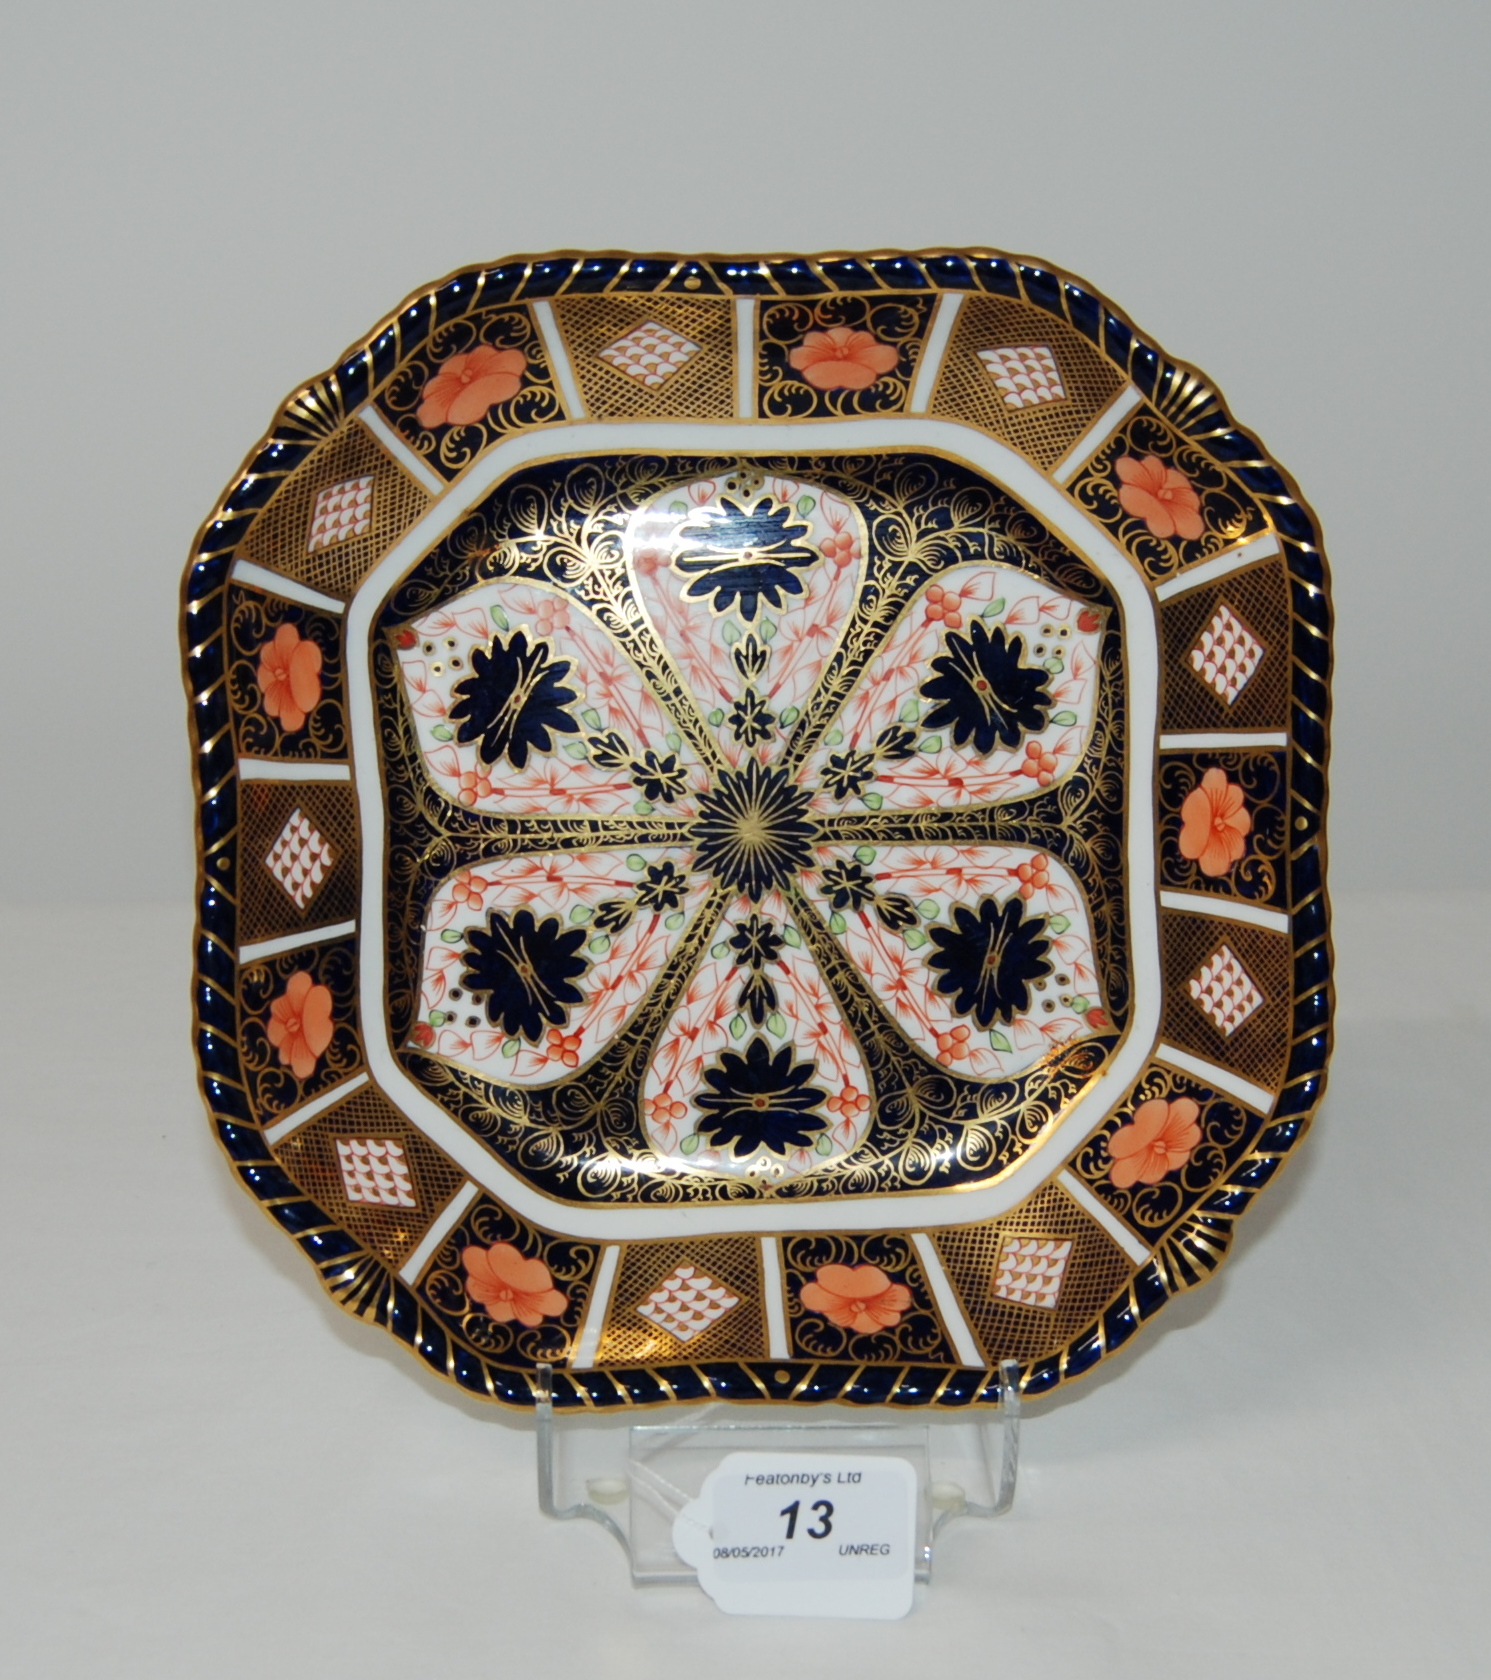 FIRST QUALITY ROYAL CROWN DERBY IMARI SQUARE FORM SHALLOW DISH WITH YEAR CYPHER FOR 1926,